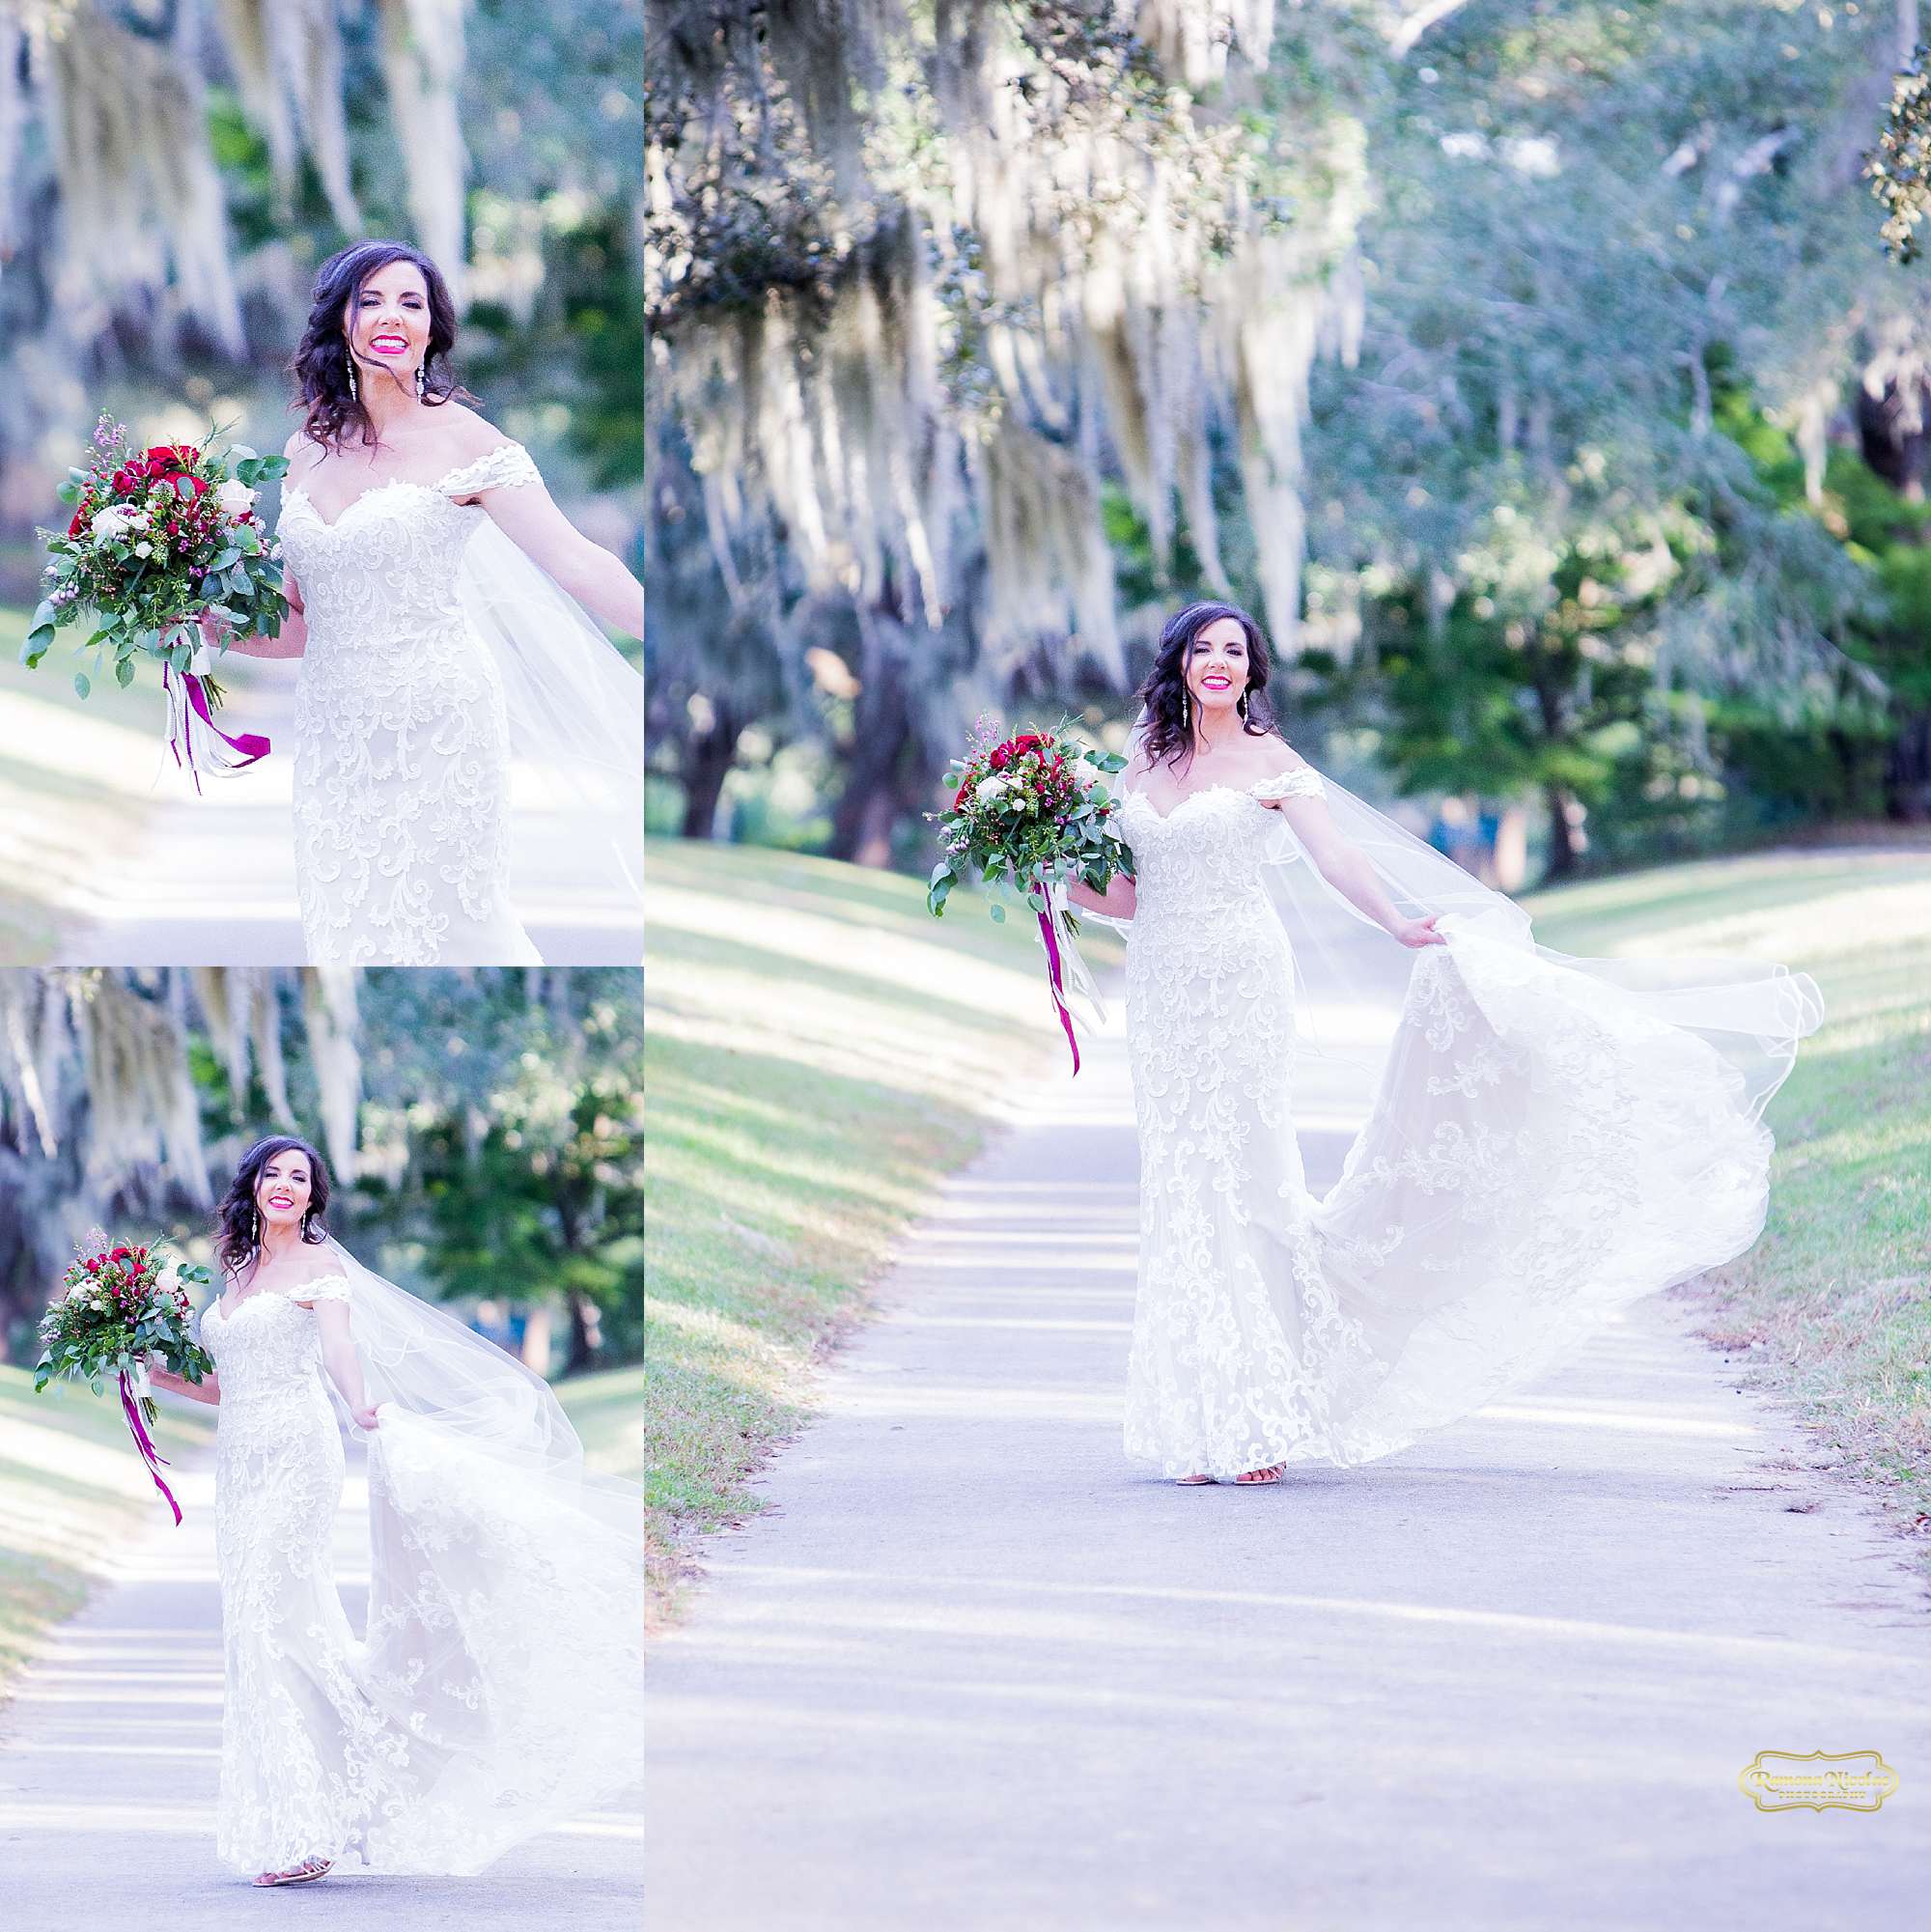 bride laughing and spinning twirling in her wedding dress with red flowers at brookgreen gardens by ramona nicolae photography myrtle beach wedding photographer-2.jpg